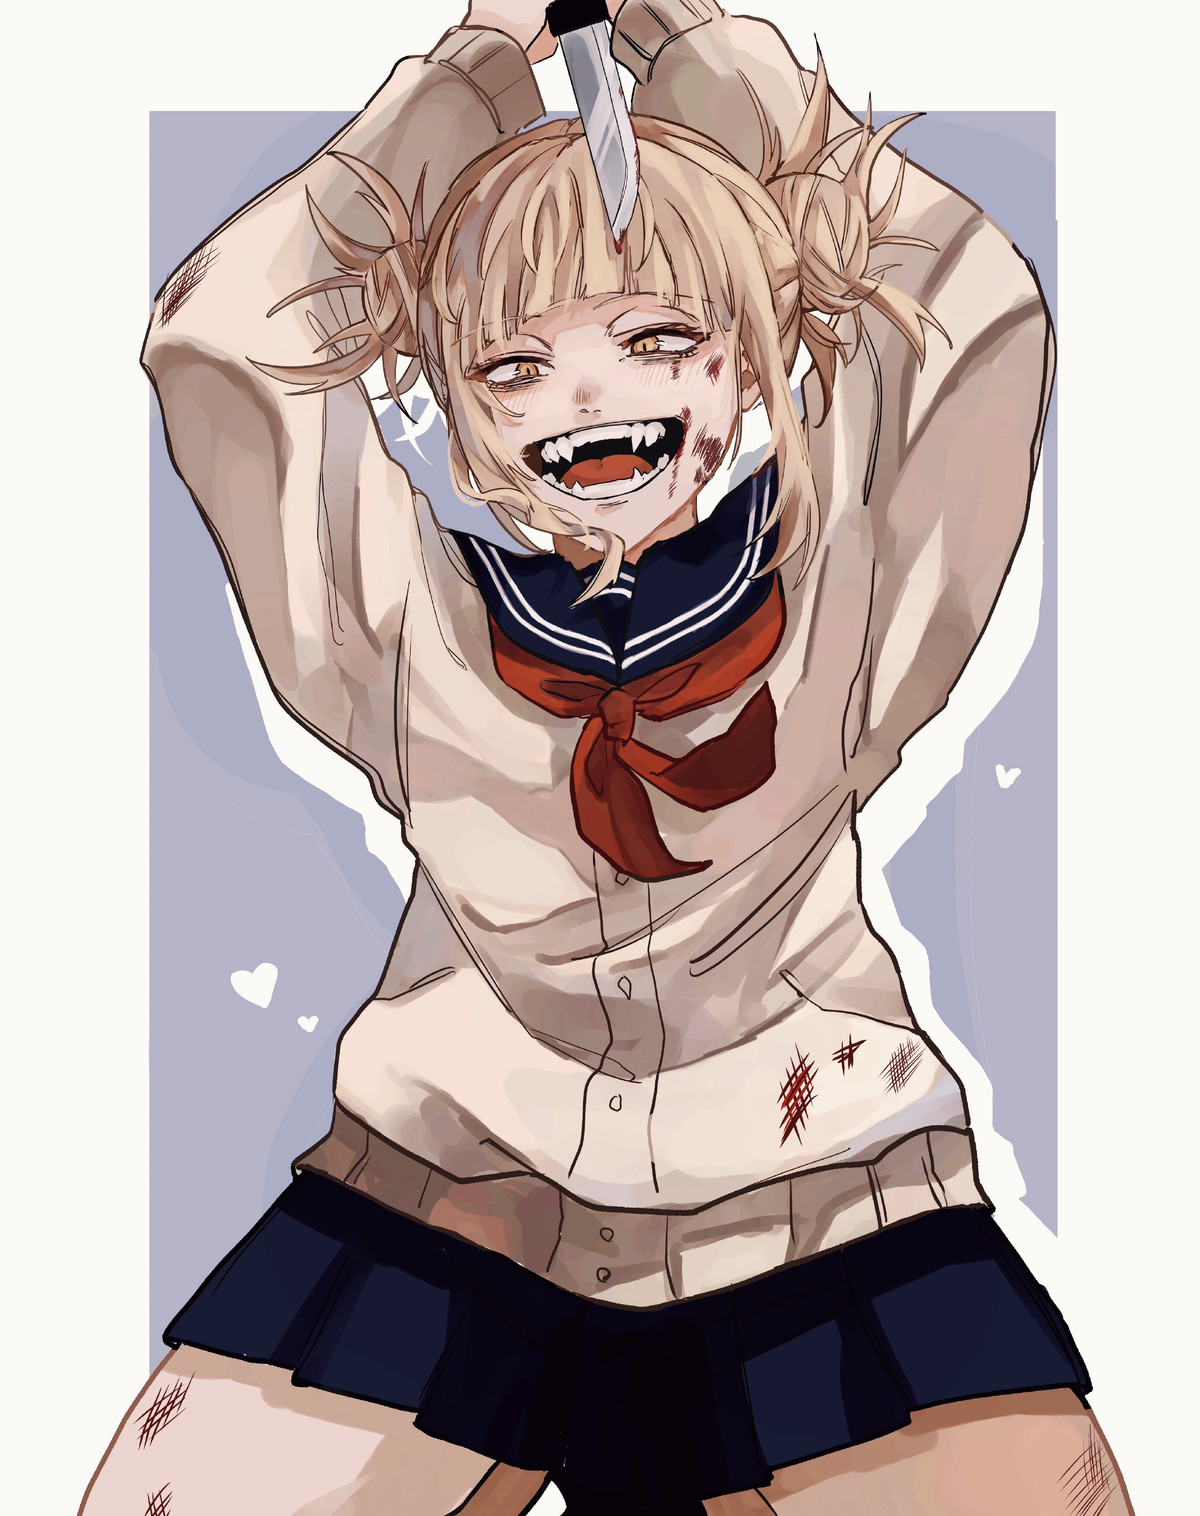 Daily Toga - 954: She likes you. join list: DailyToga (477 subs)Mention History Source: .. She thinks I’m tasty?